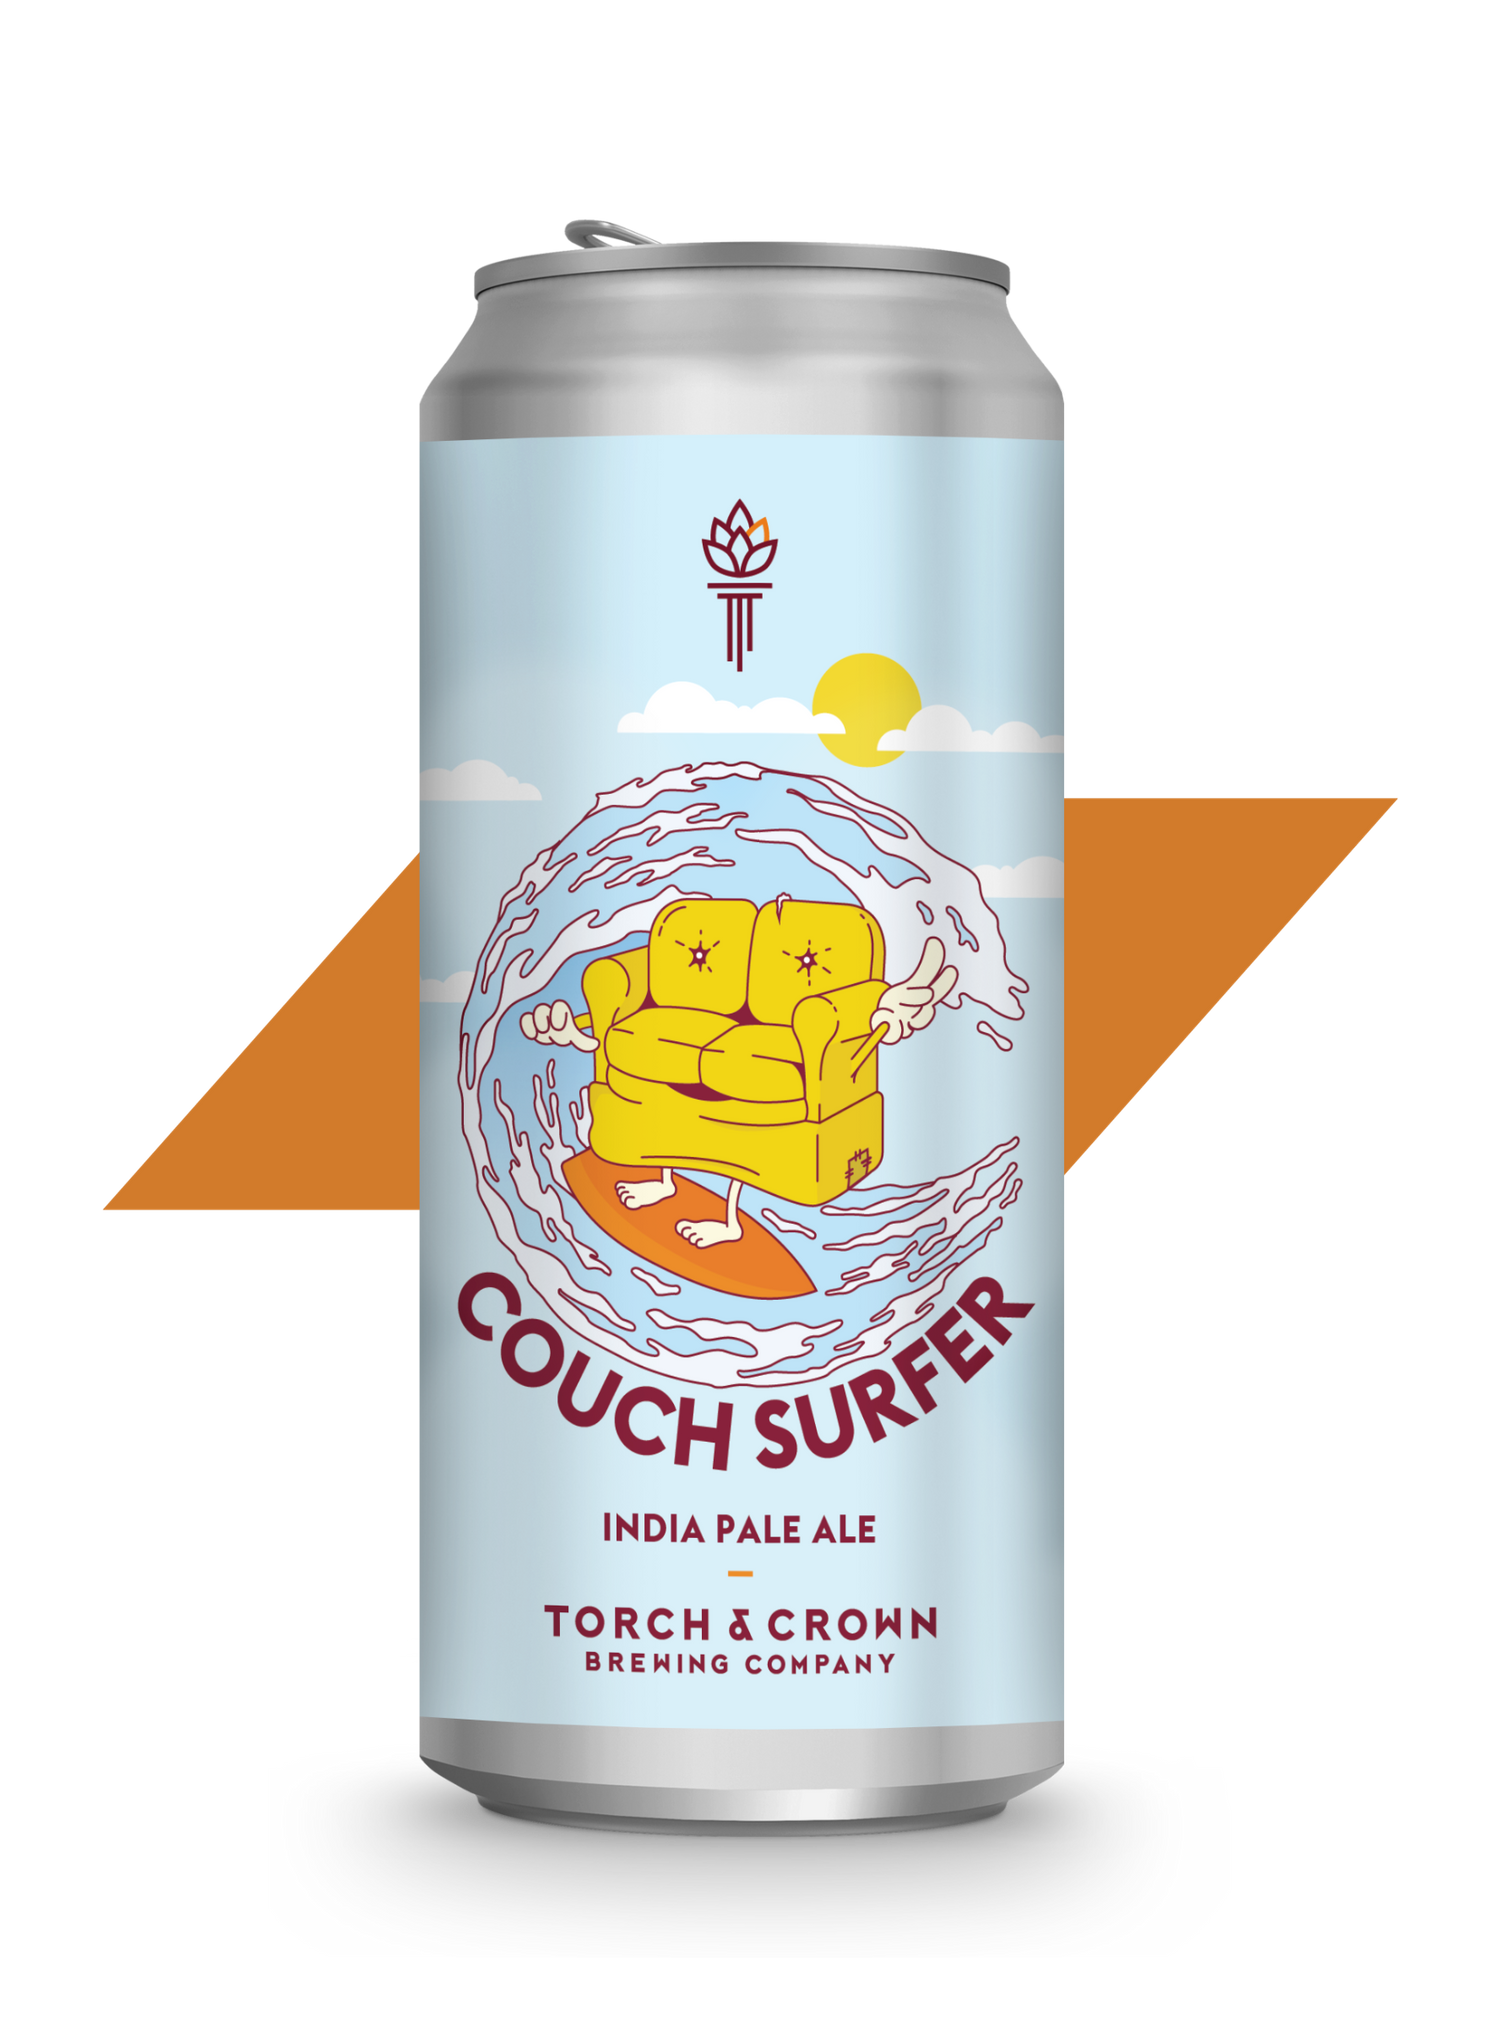 Couch Surfer | Torch and Crown Brewing Company